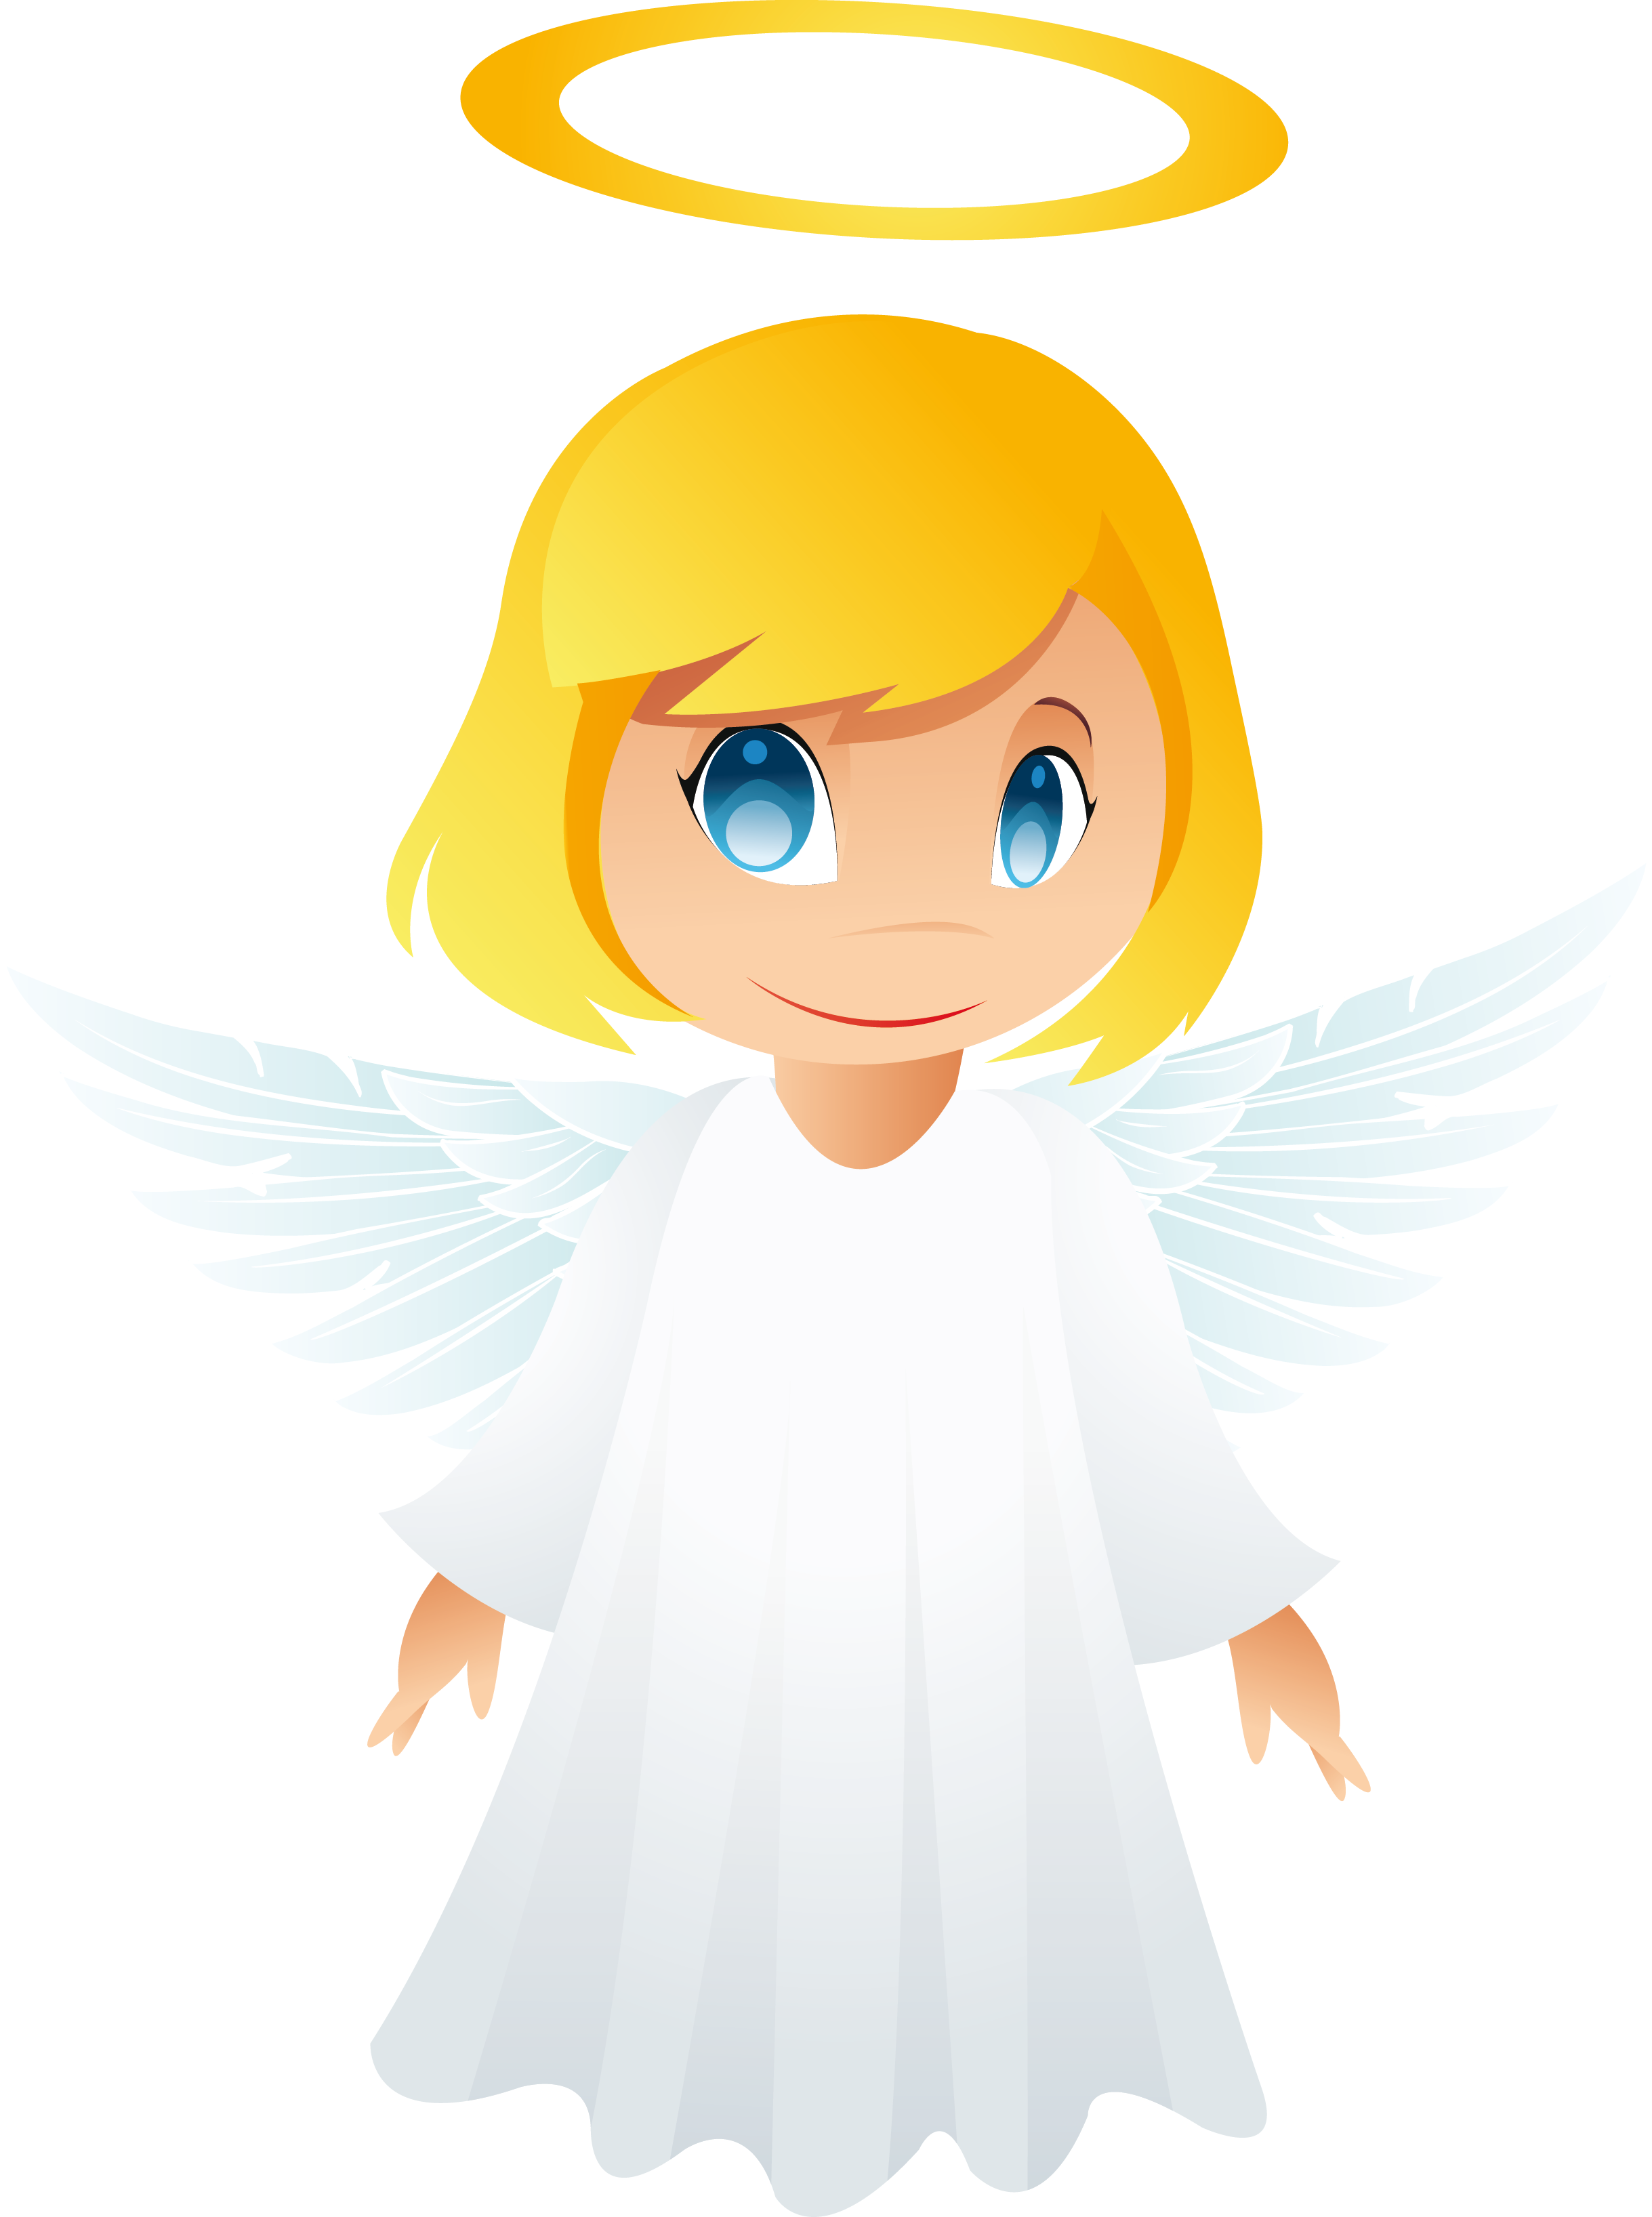 Angel clipart free graphics o - Angel Clipart Images